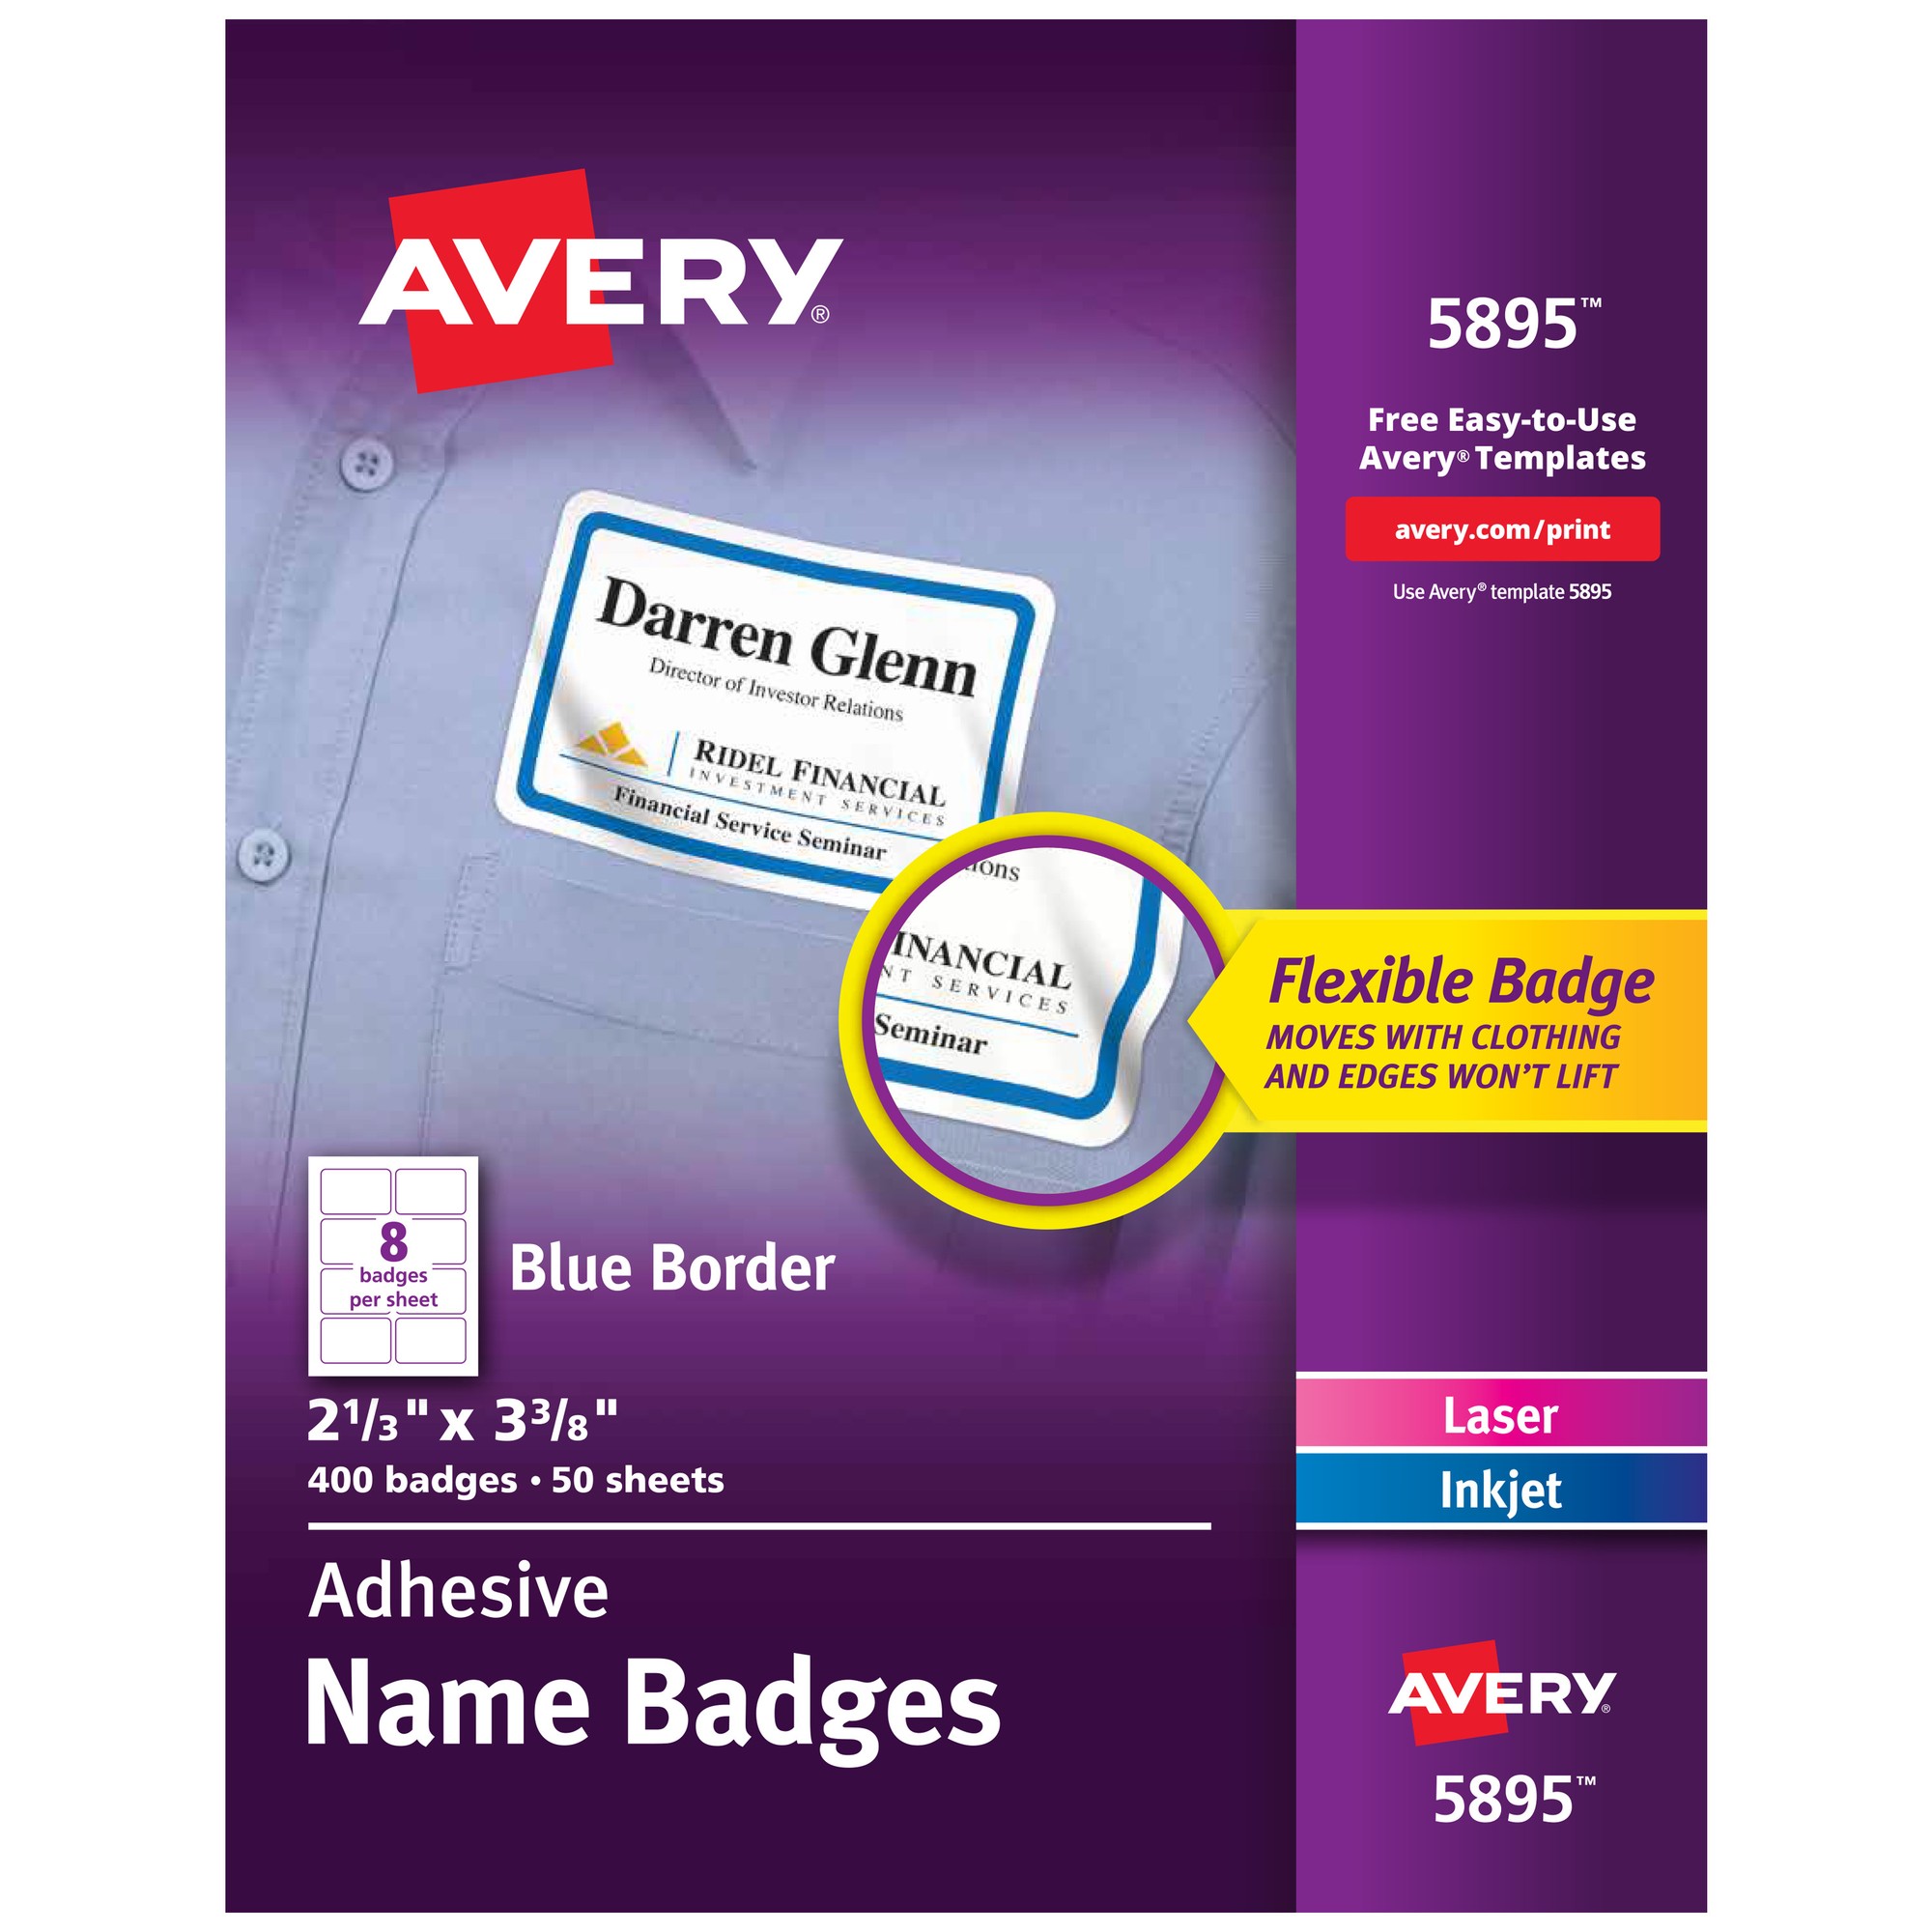 Avery Adhesive Name Badges - 2 21/64" Width x 3 3/8" Length - Removable Adhesive - Rectangle - Laser, Inkjet - White, Blue 